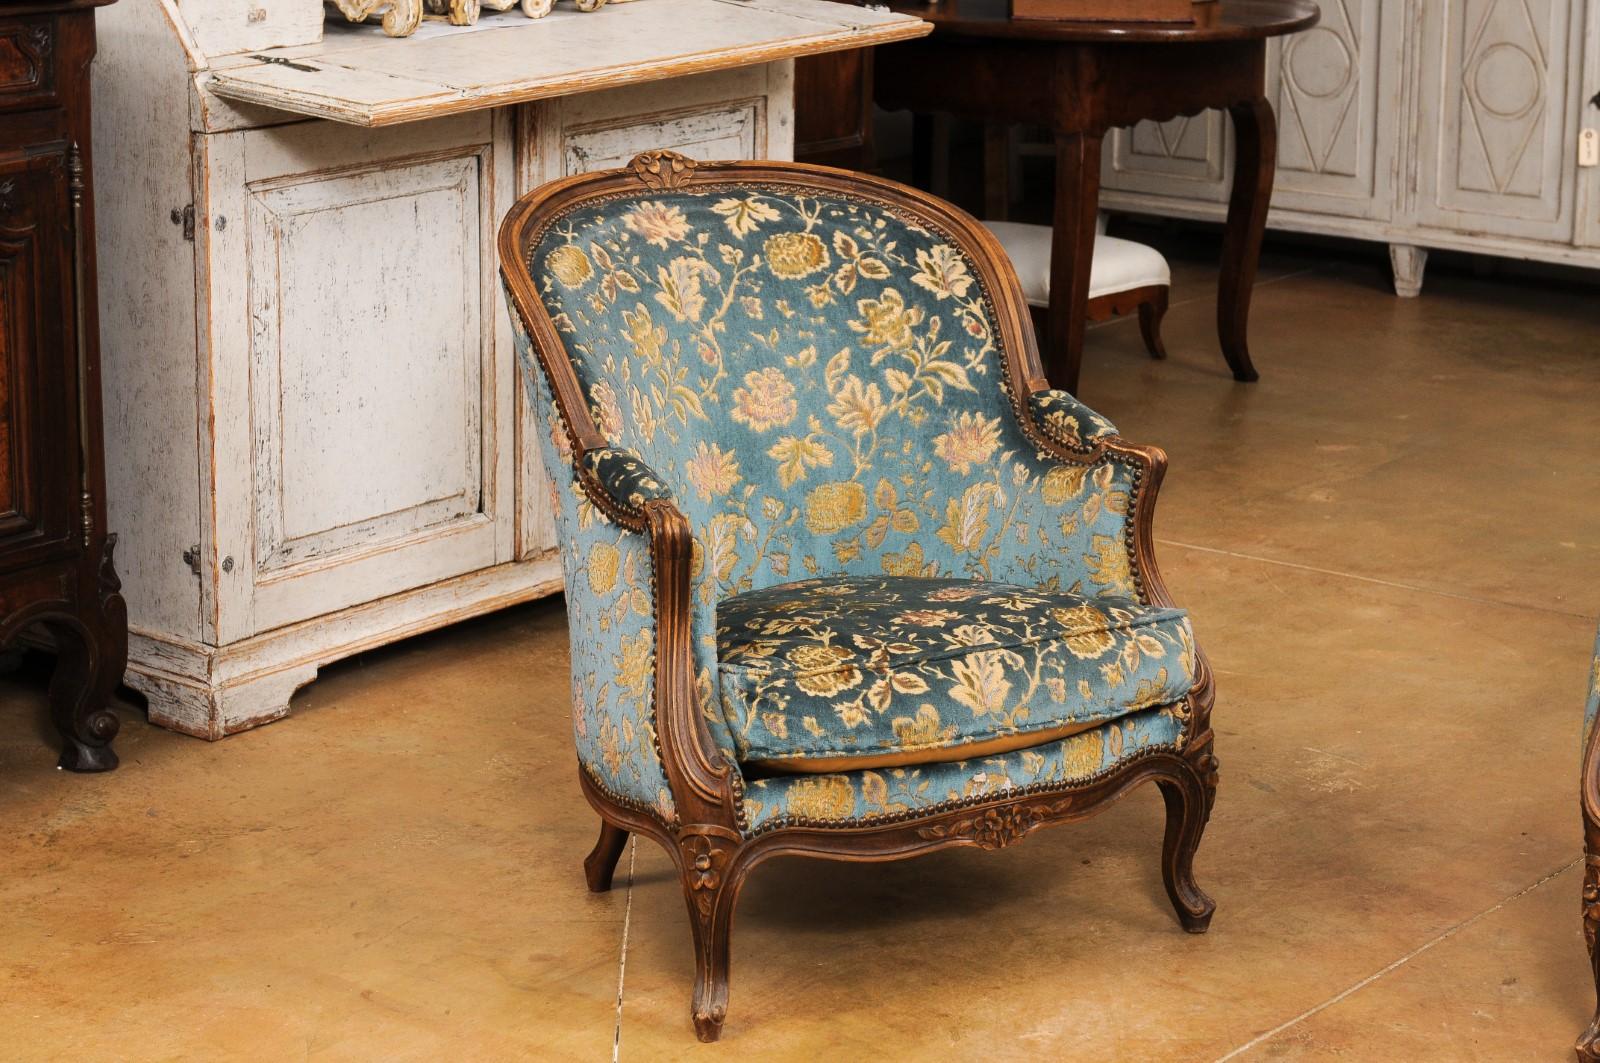 A French Louis XV style walnut bergères chair from the 19th century with carved crests, scrolling arms, floral carved apron, cabriole legs and floral upholstery. Enhance your living space with this exquisite French Louis XV style walnut bergères